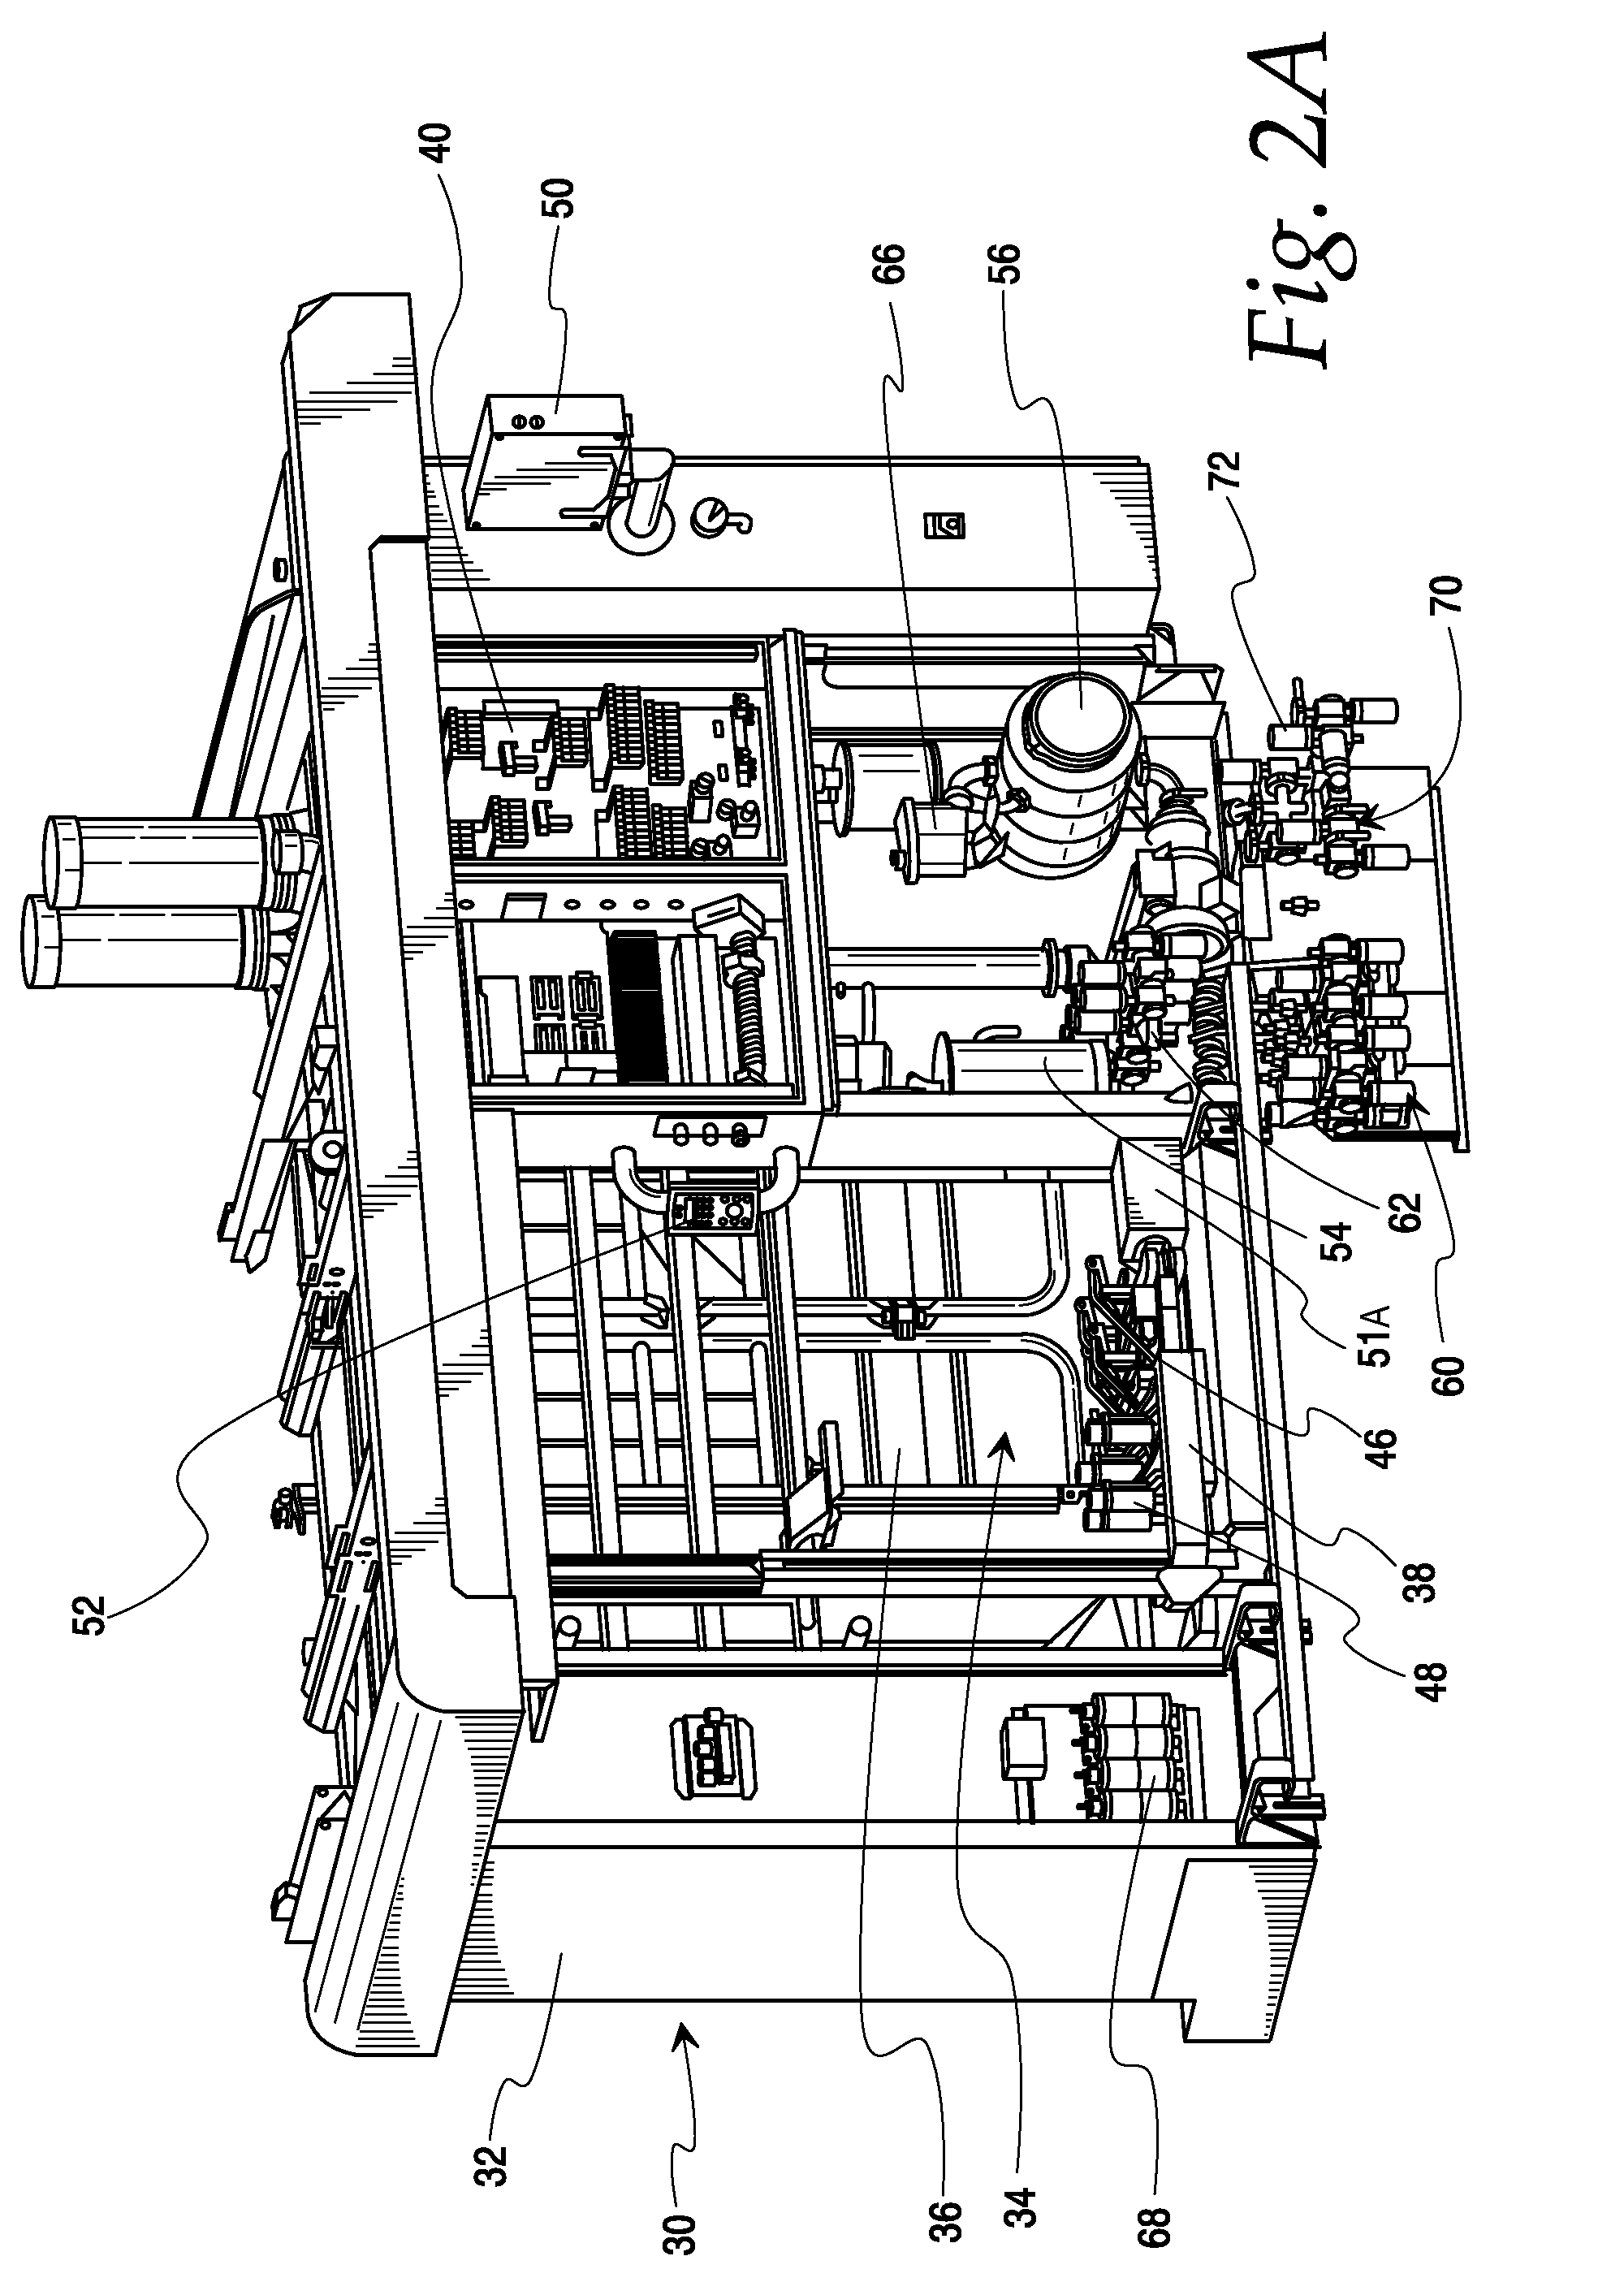 Dairy harvesting facility with milk line protection system and methods